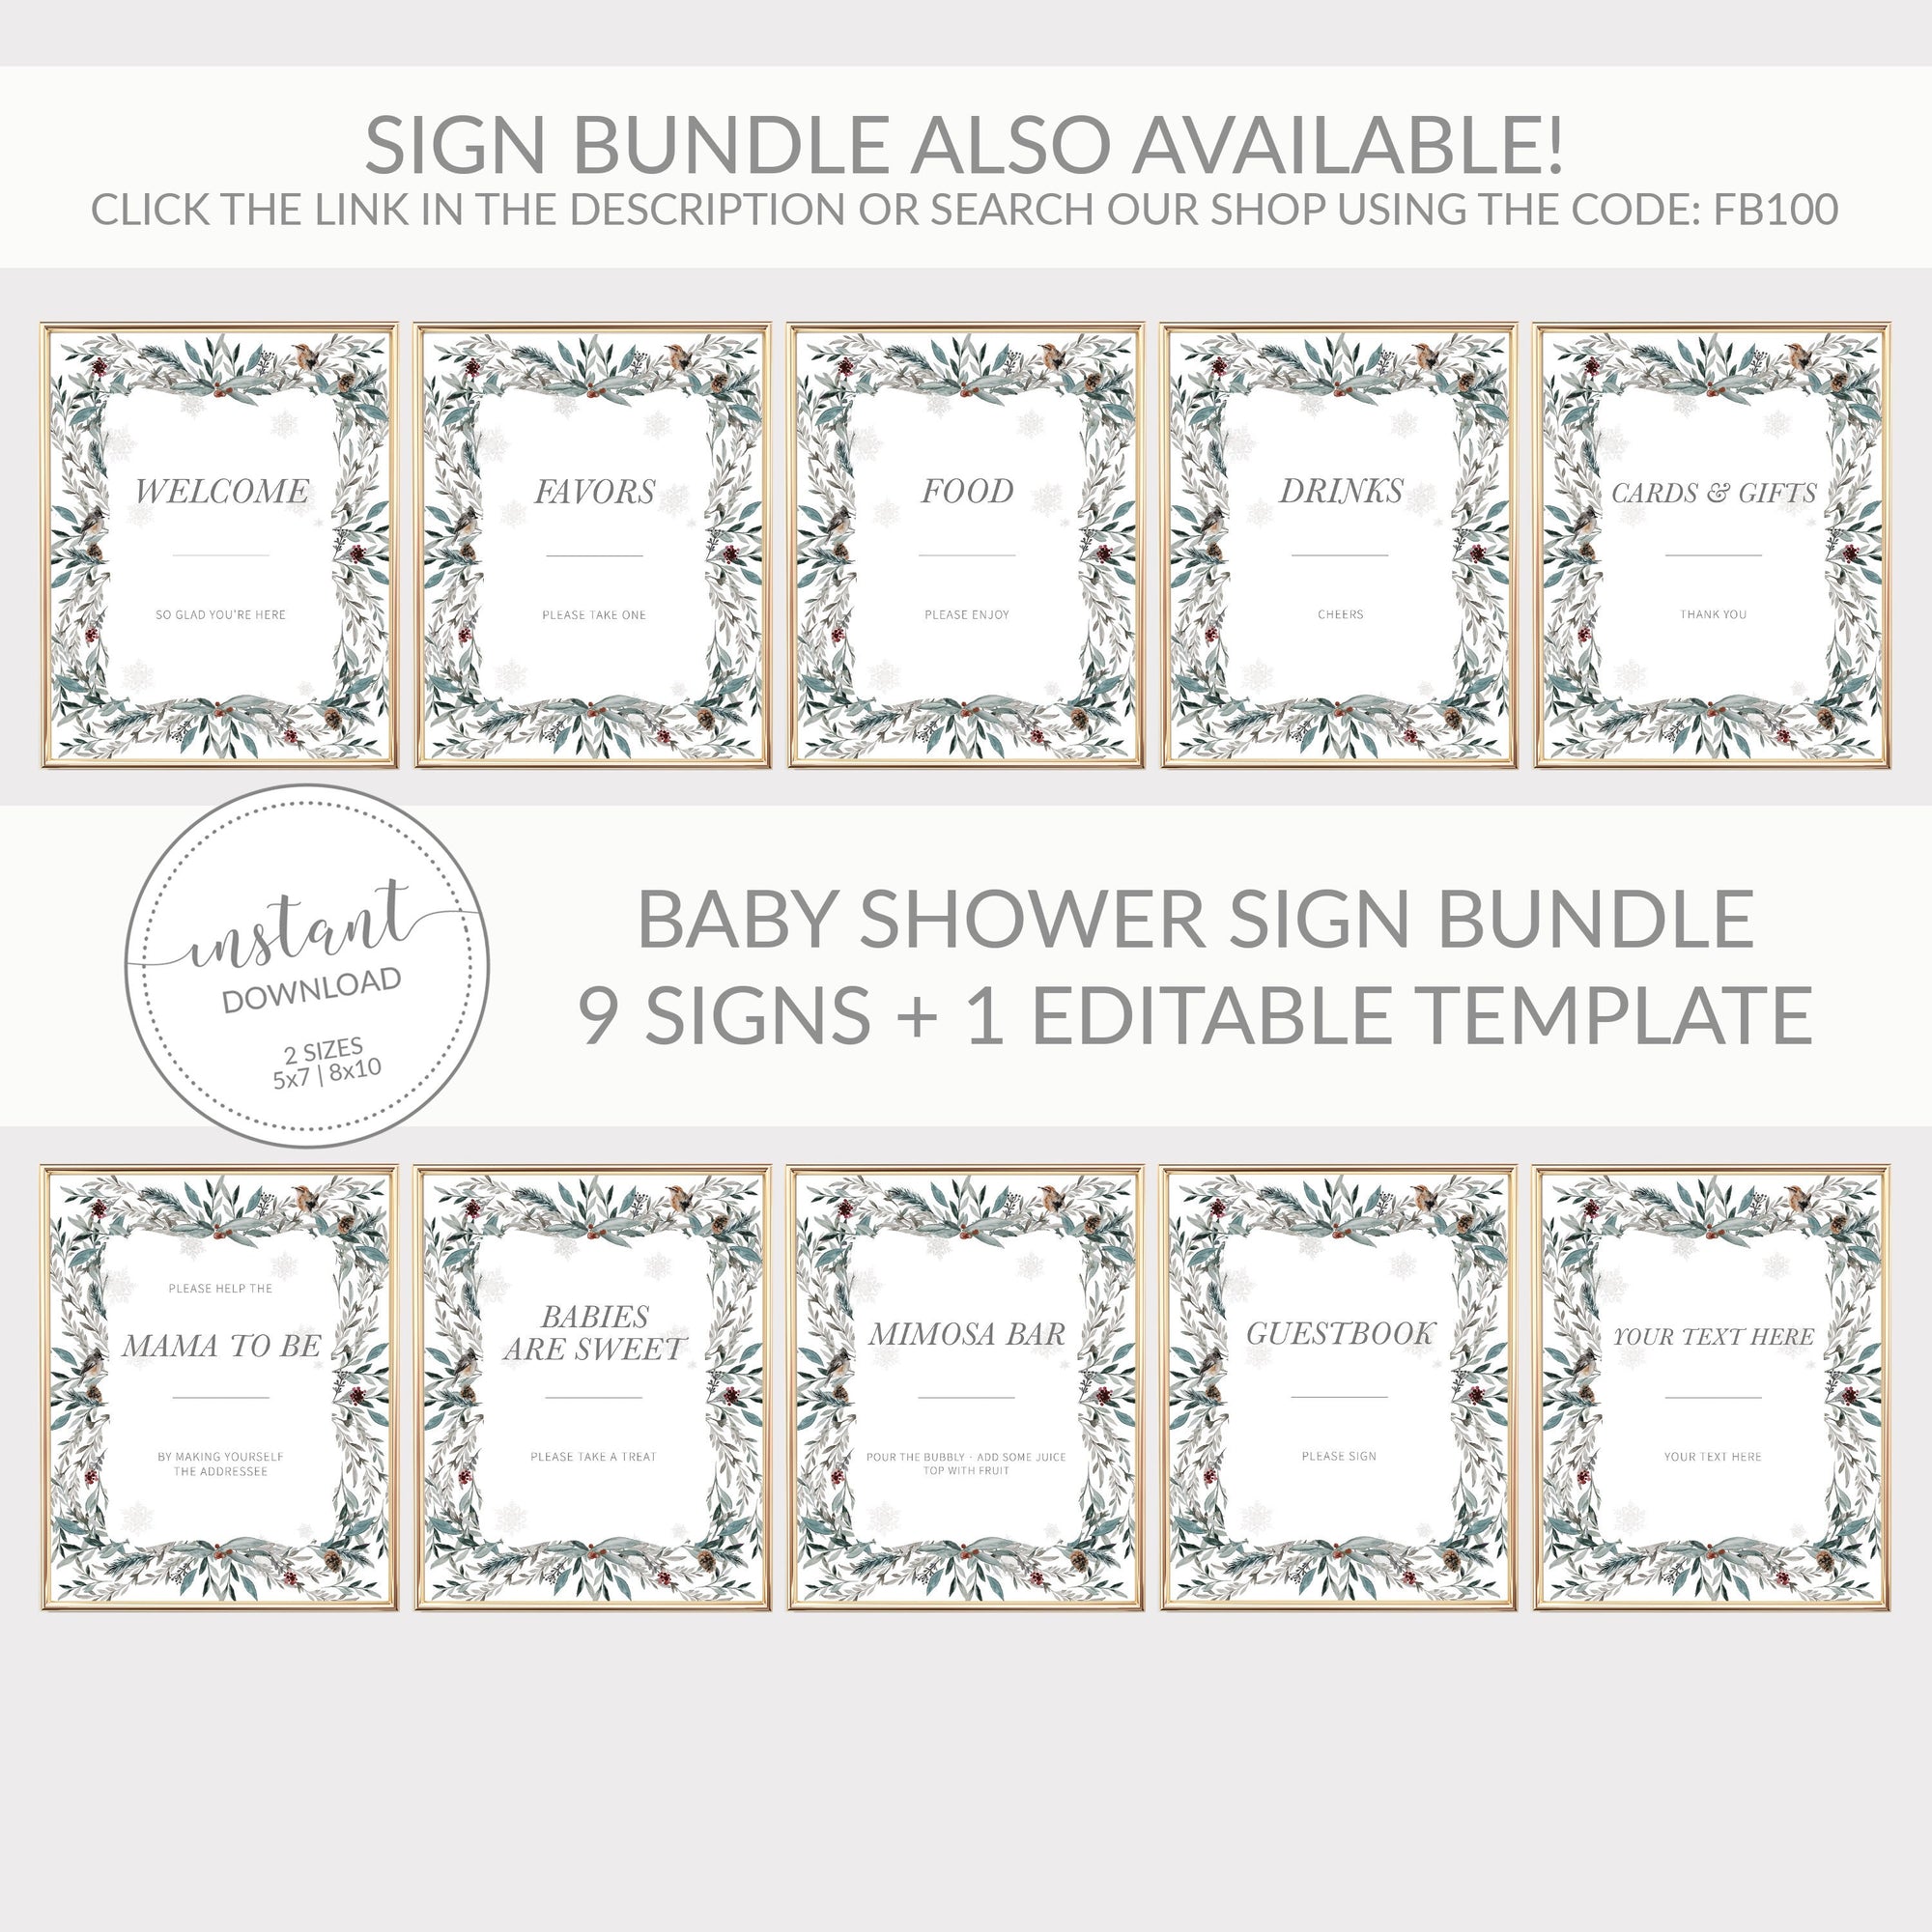 Christmas Baby Shower Addressee Sign Printable, Address an Envelope Sign, Winter Baby Shower Decorations, INSTANT DOWNLOAD - FB100